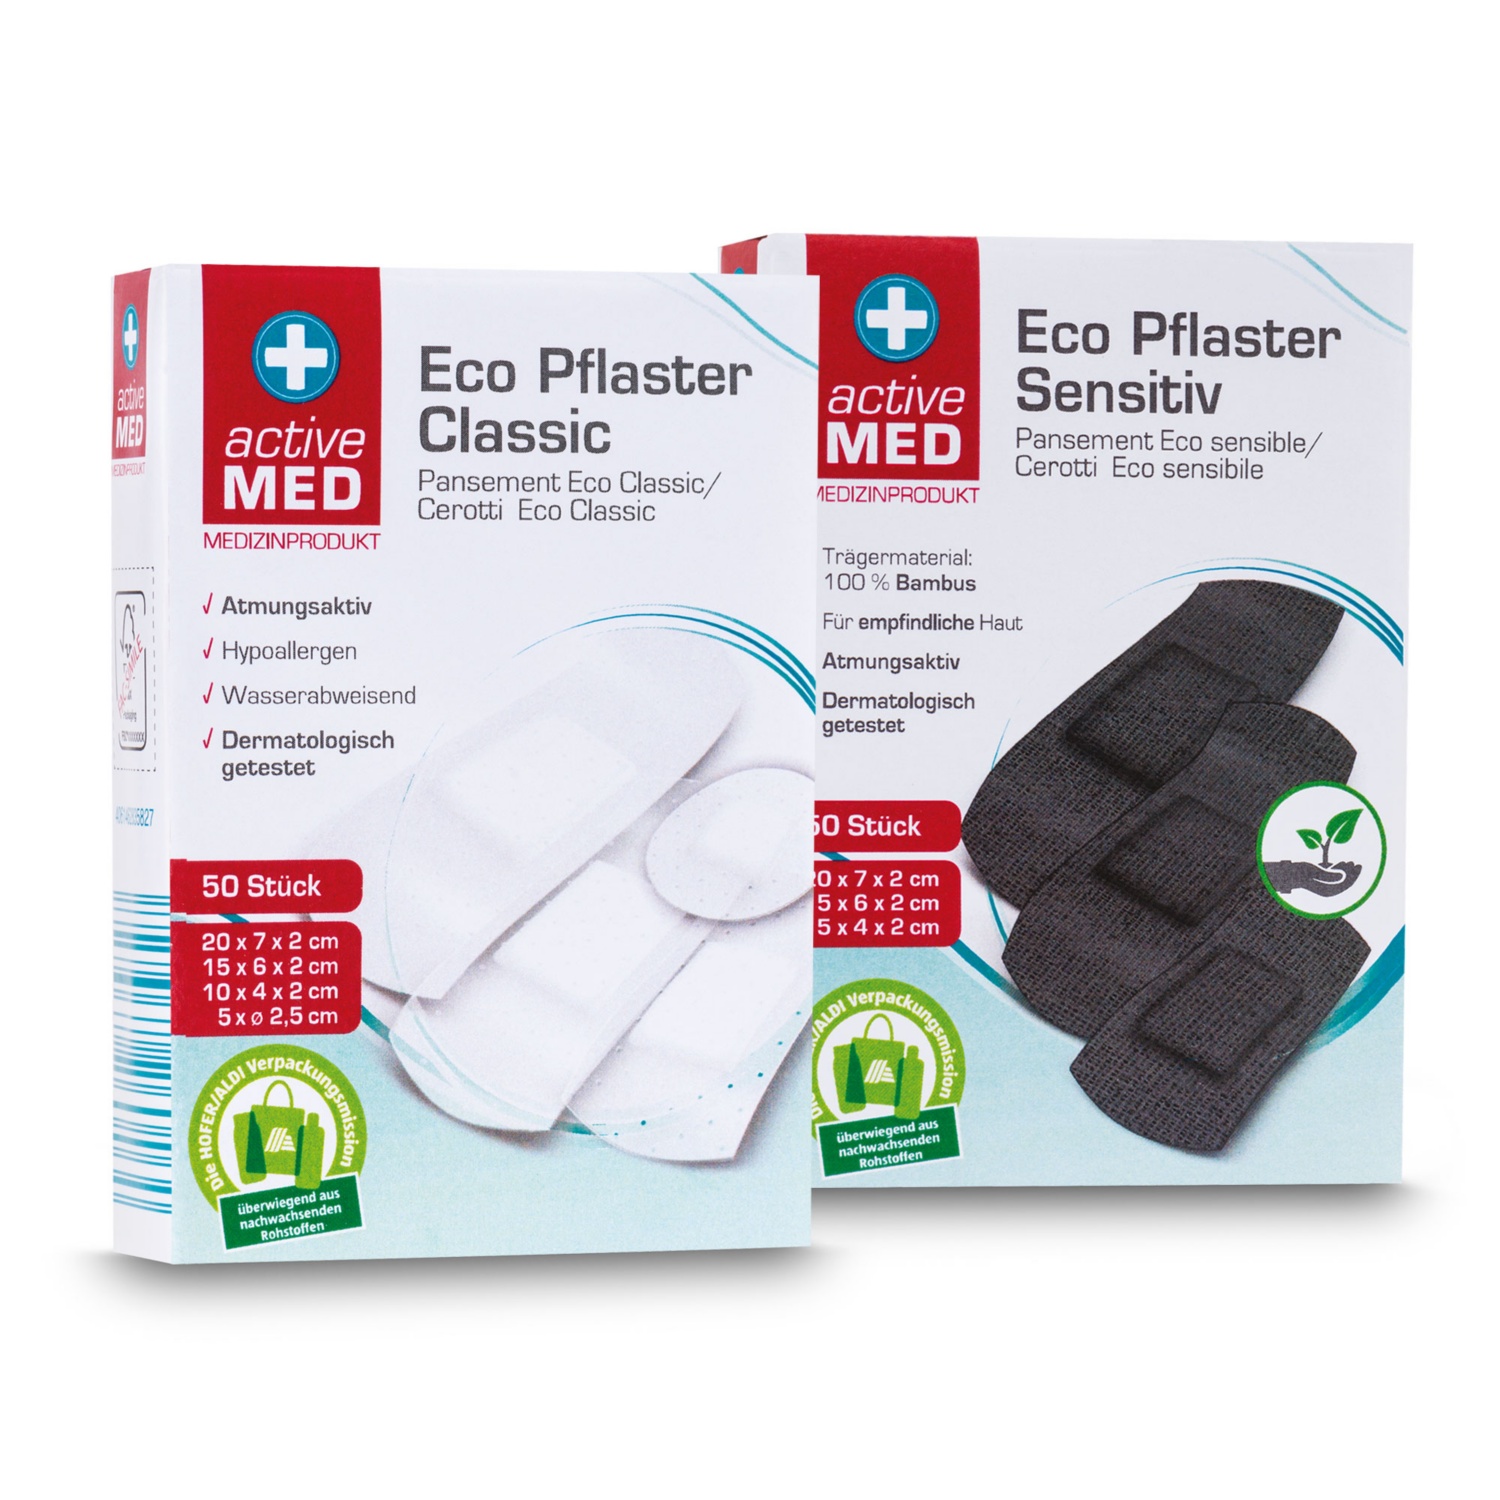 ACTIVE MED Eco Pflaster